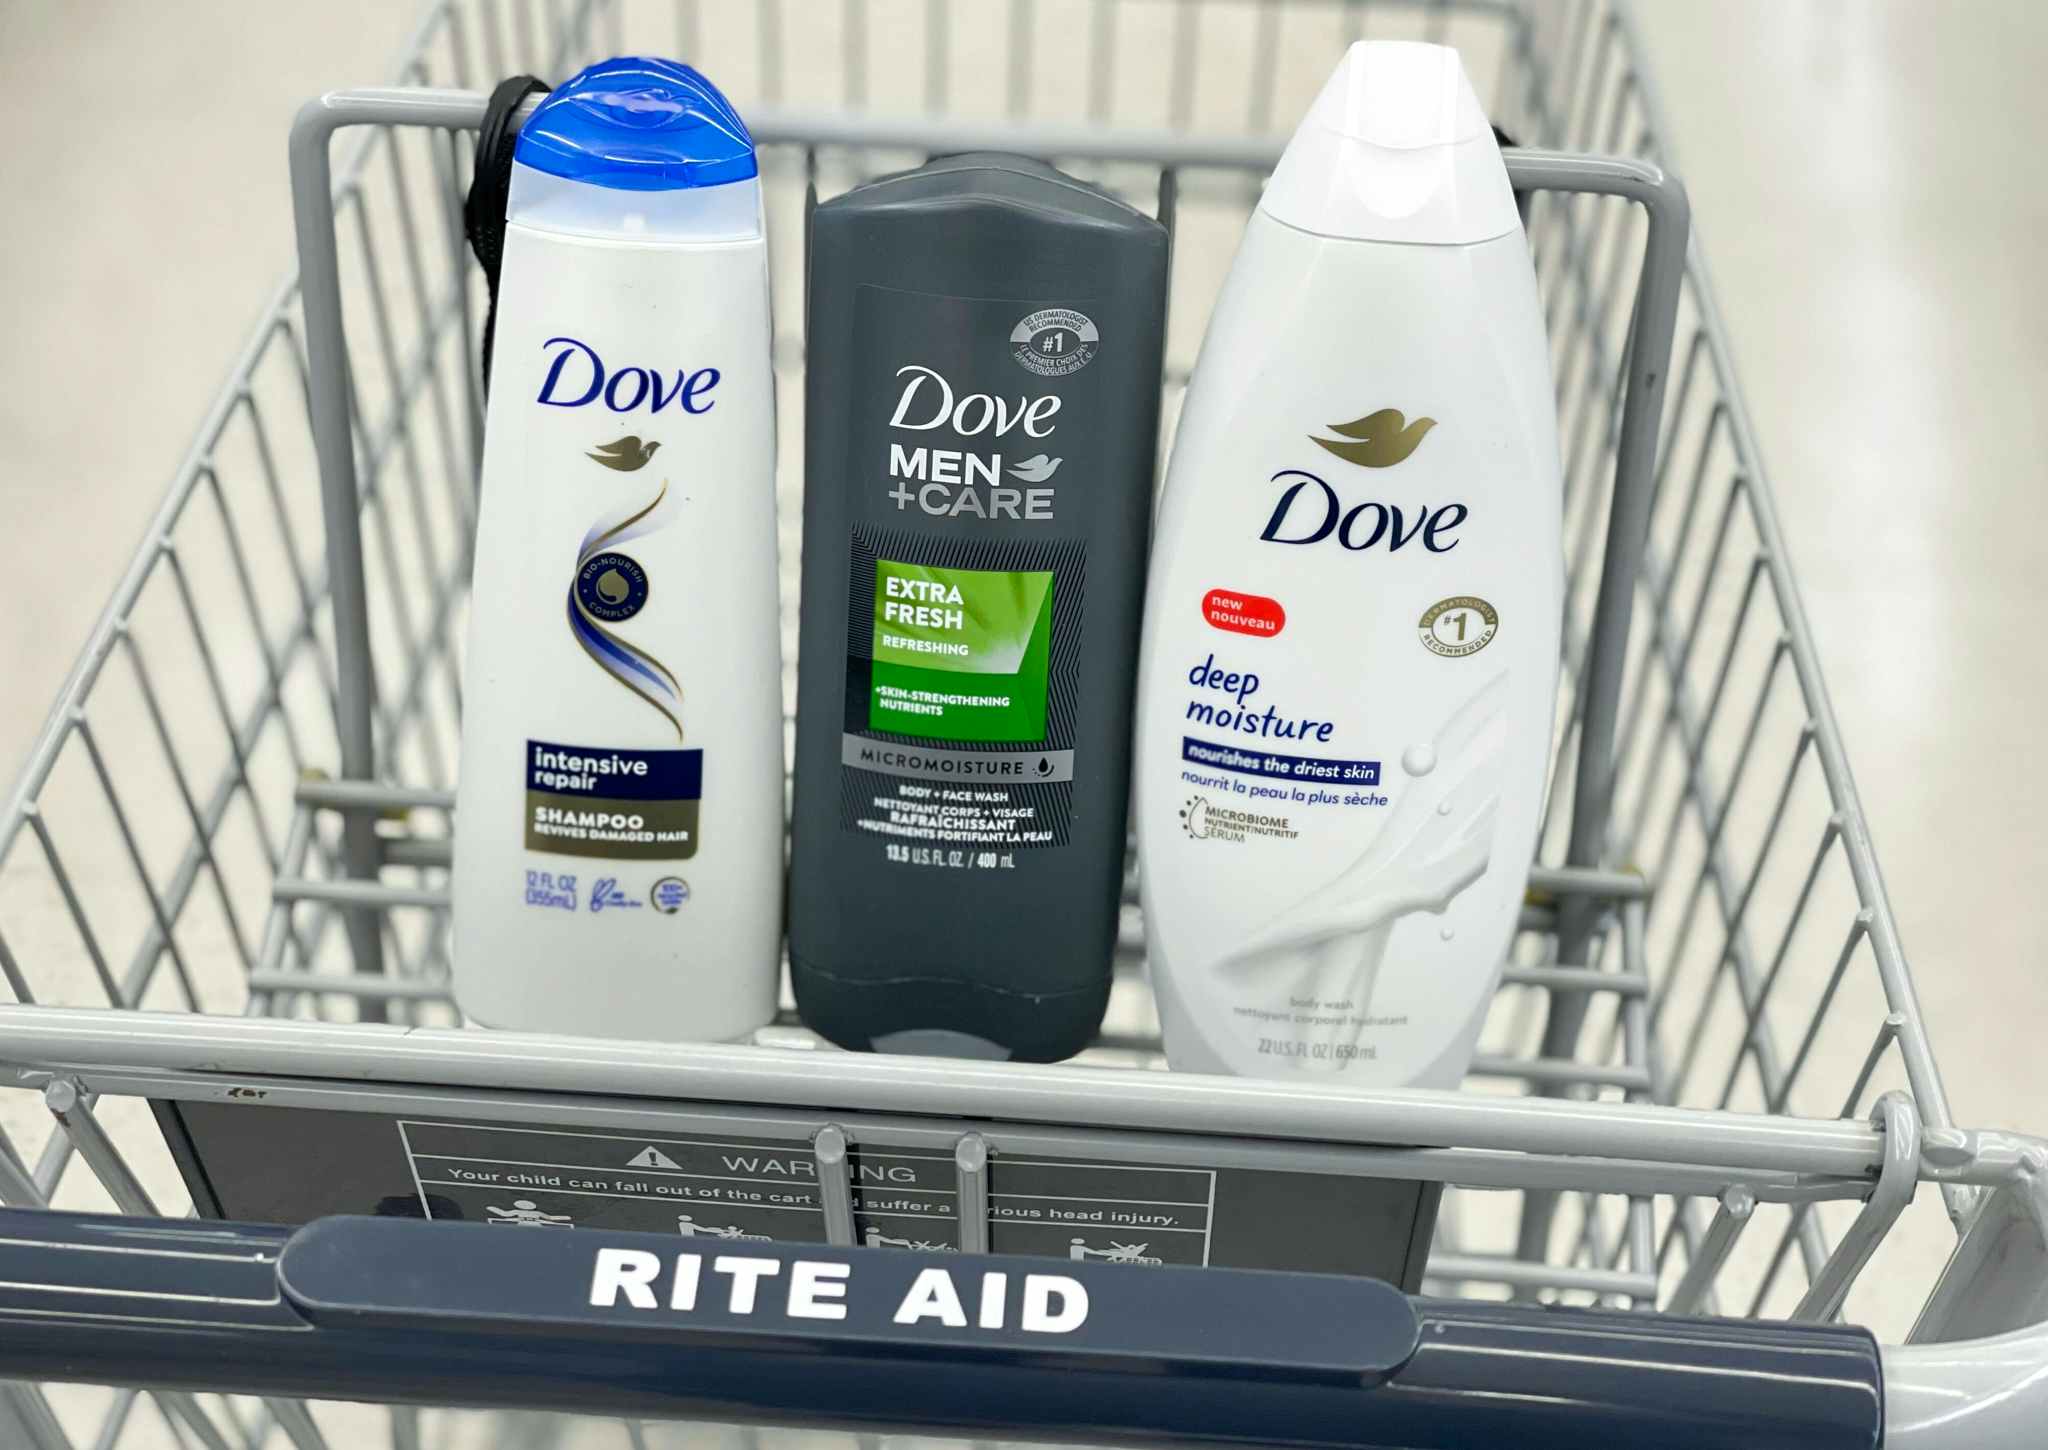 dove shampoo and body wash in rite aid cart